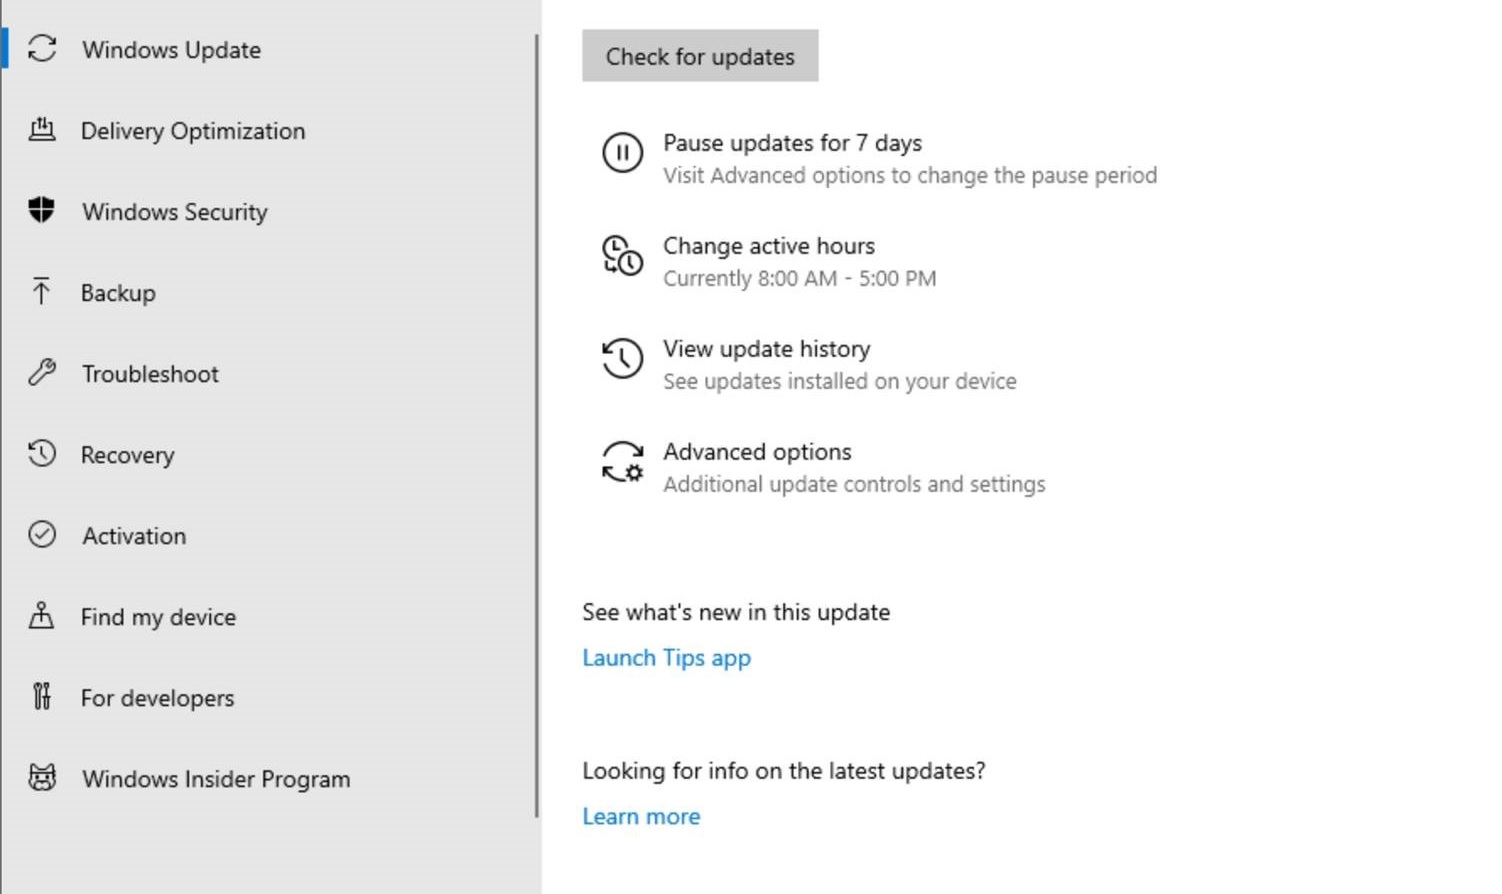 Microsoft confirms it will allow Home users to delay Windows 10 updates Pause-Windows-Updates.jpg